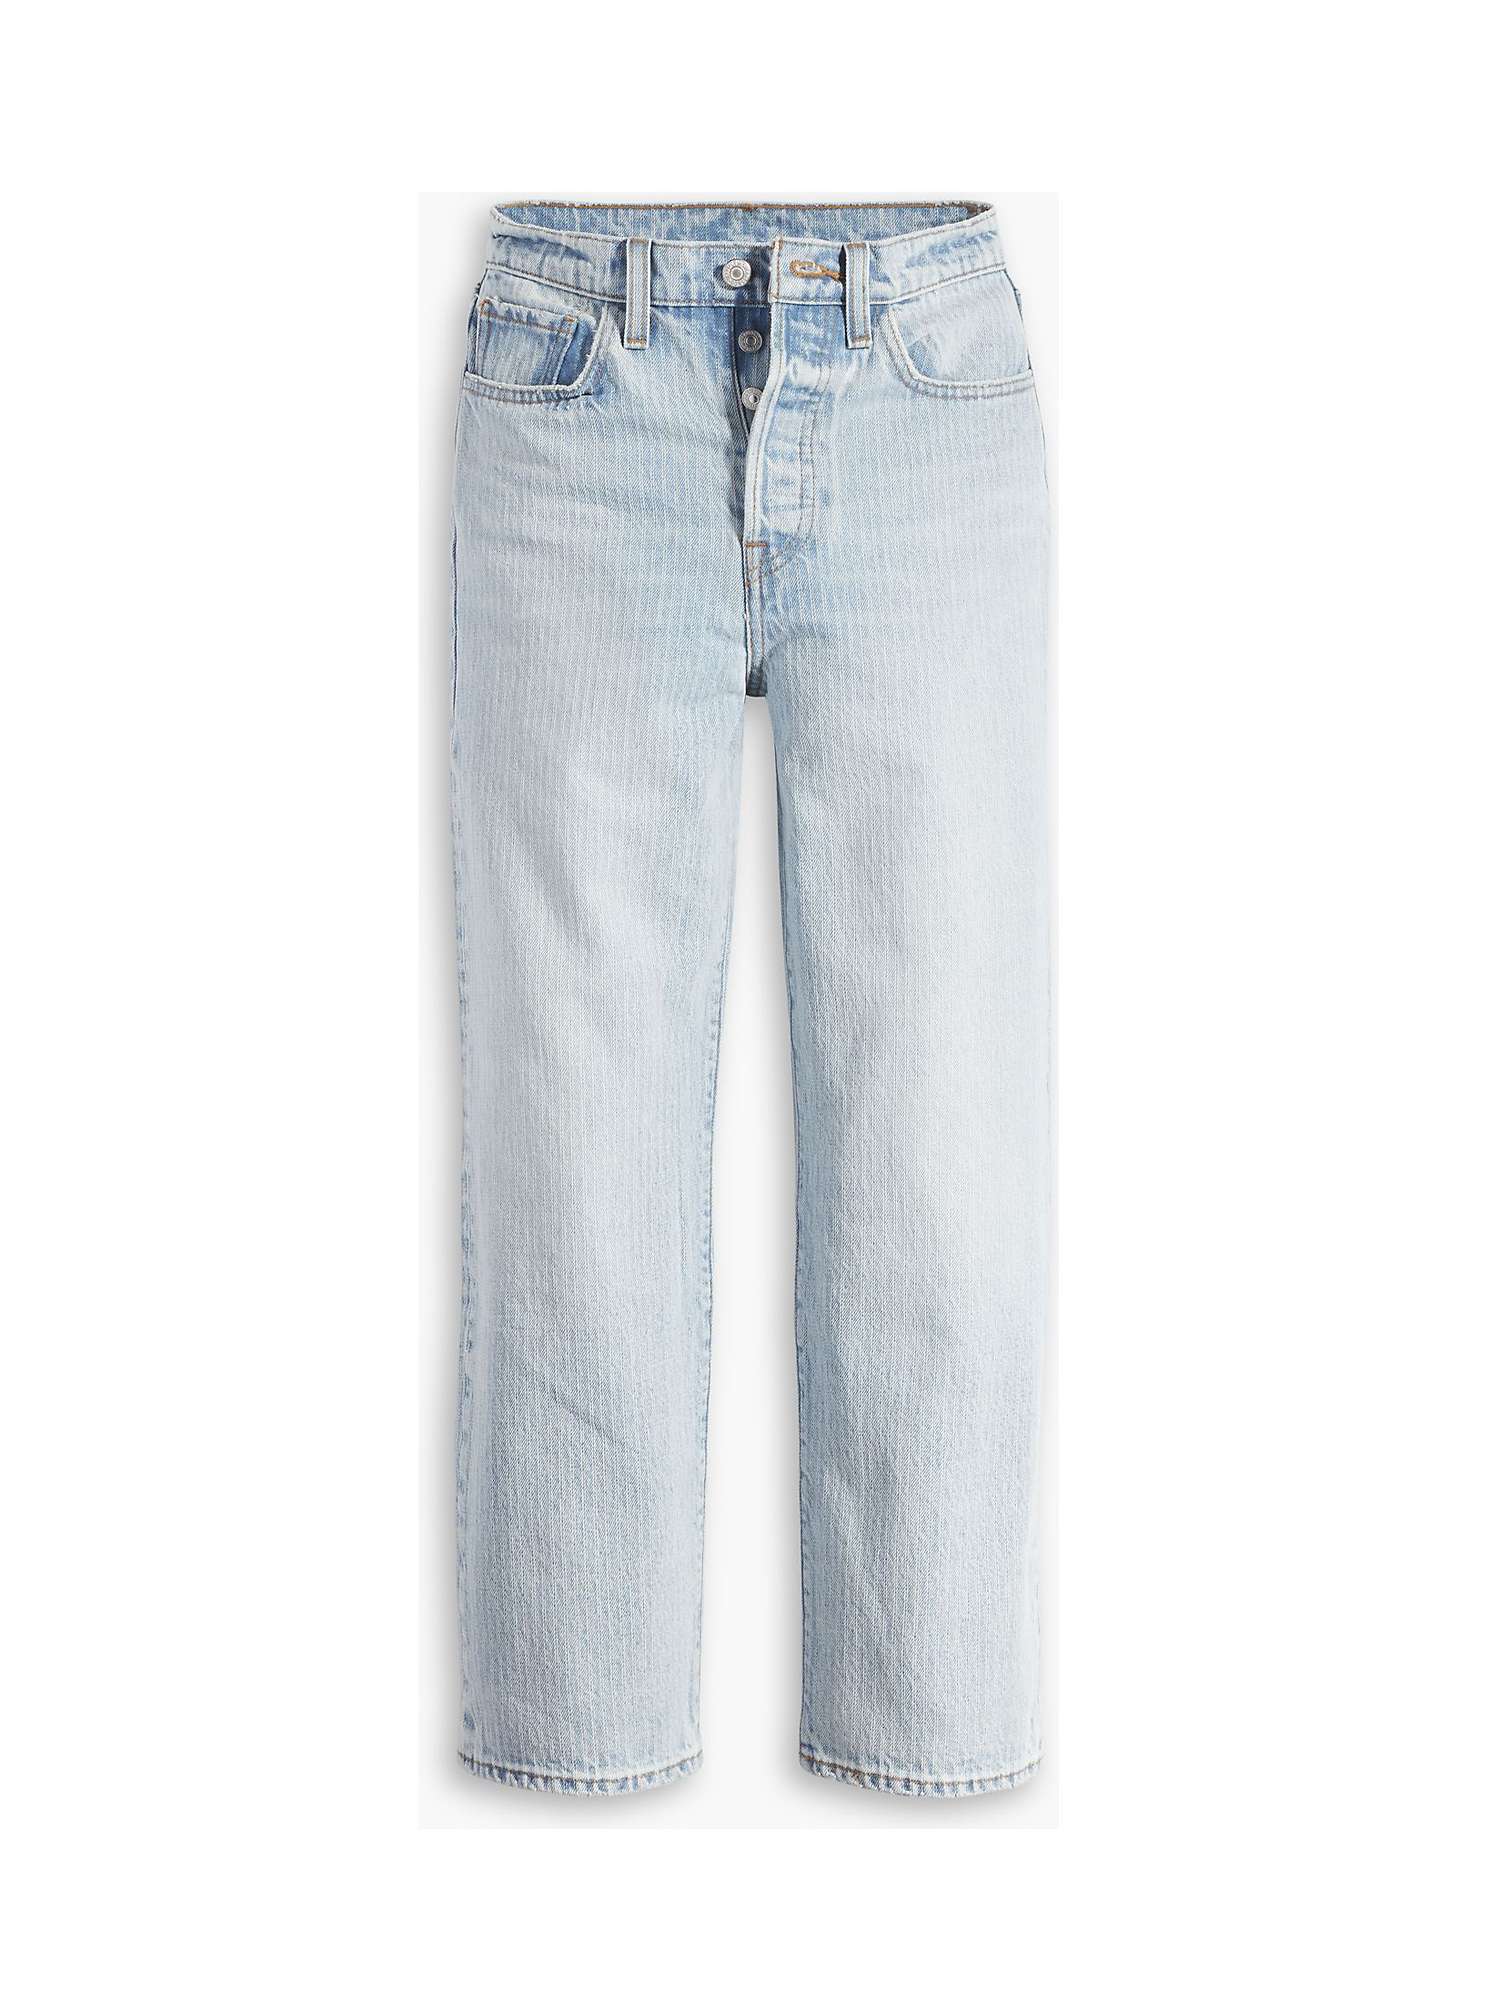 Levi's 501 81 Straight Cut Jeans, Linear Motion at John Lewis & Partners